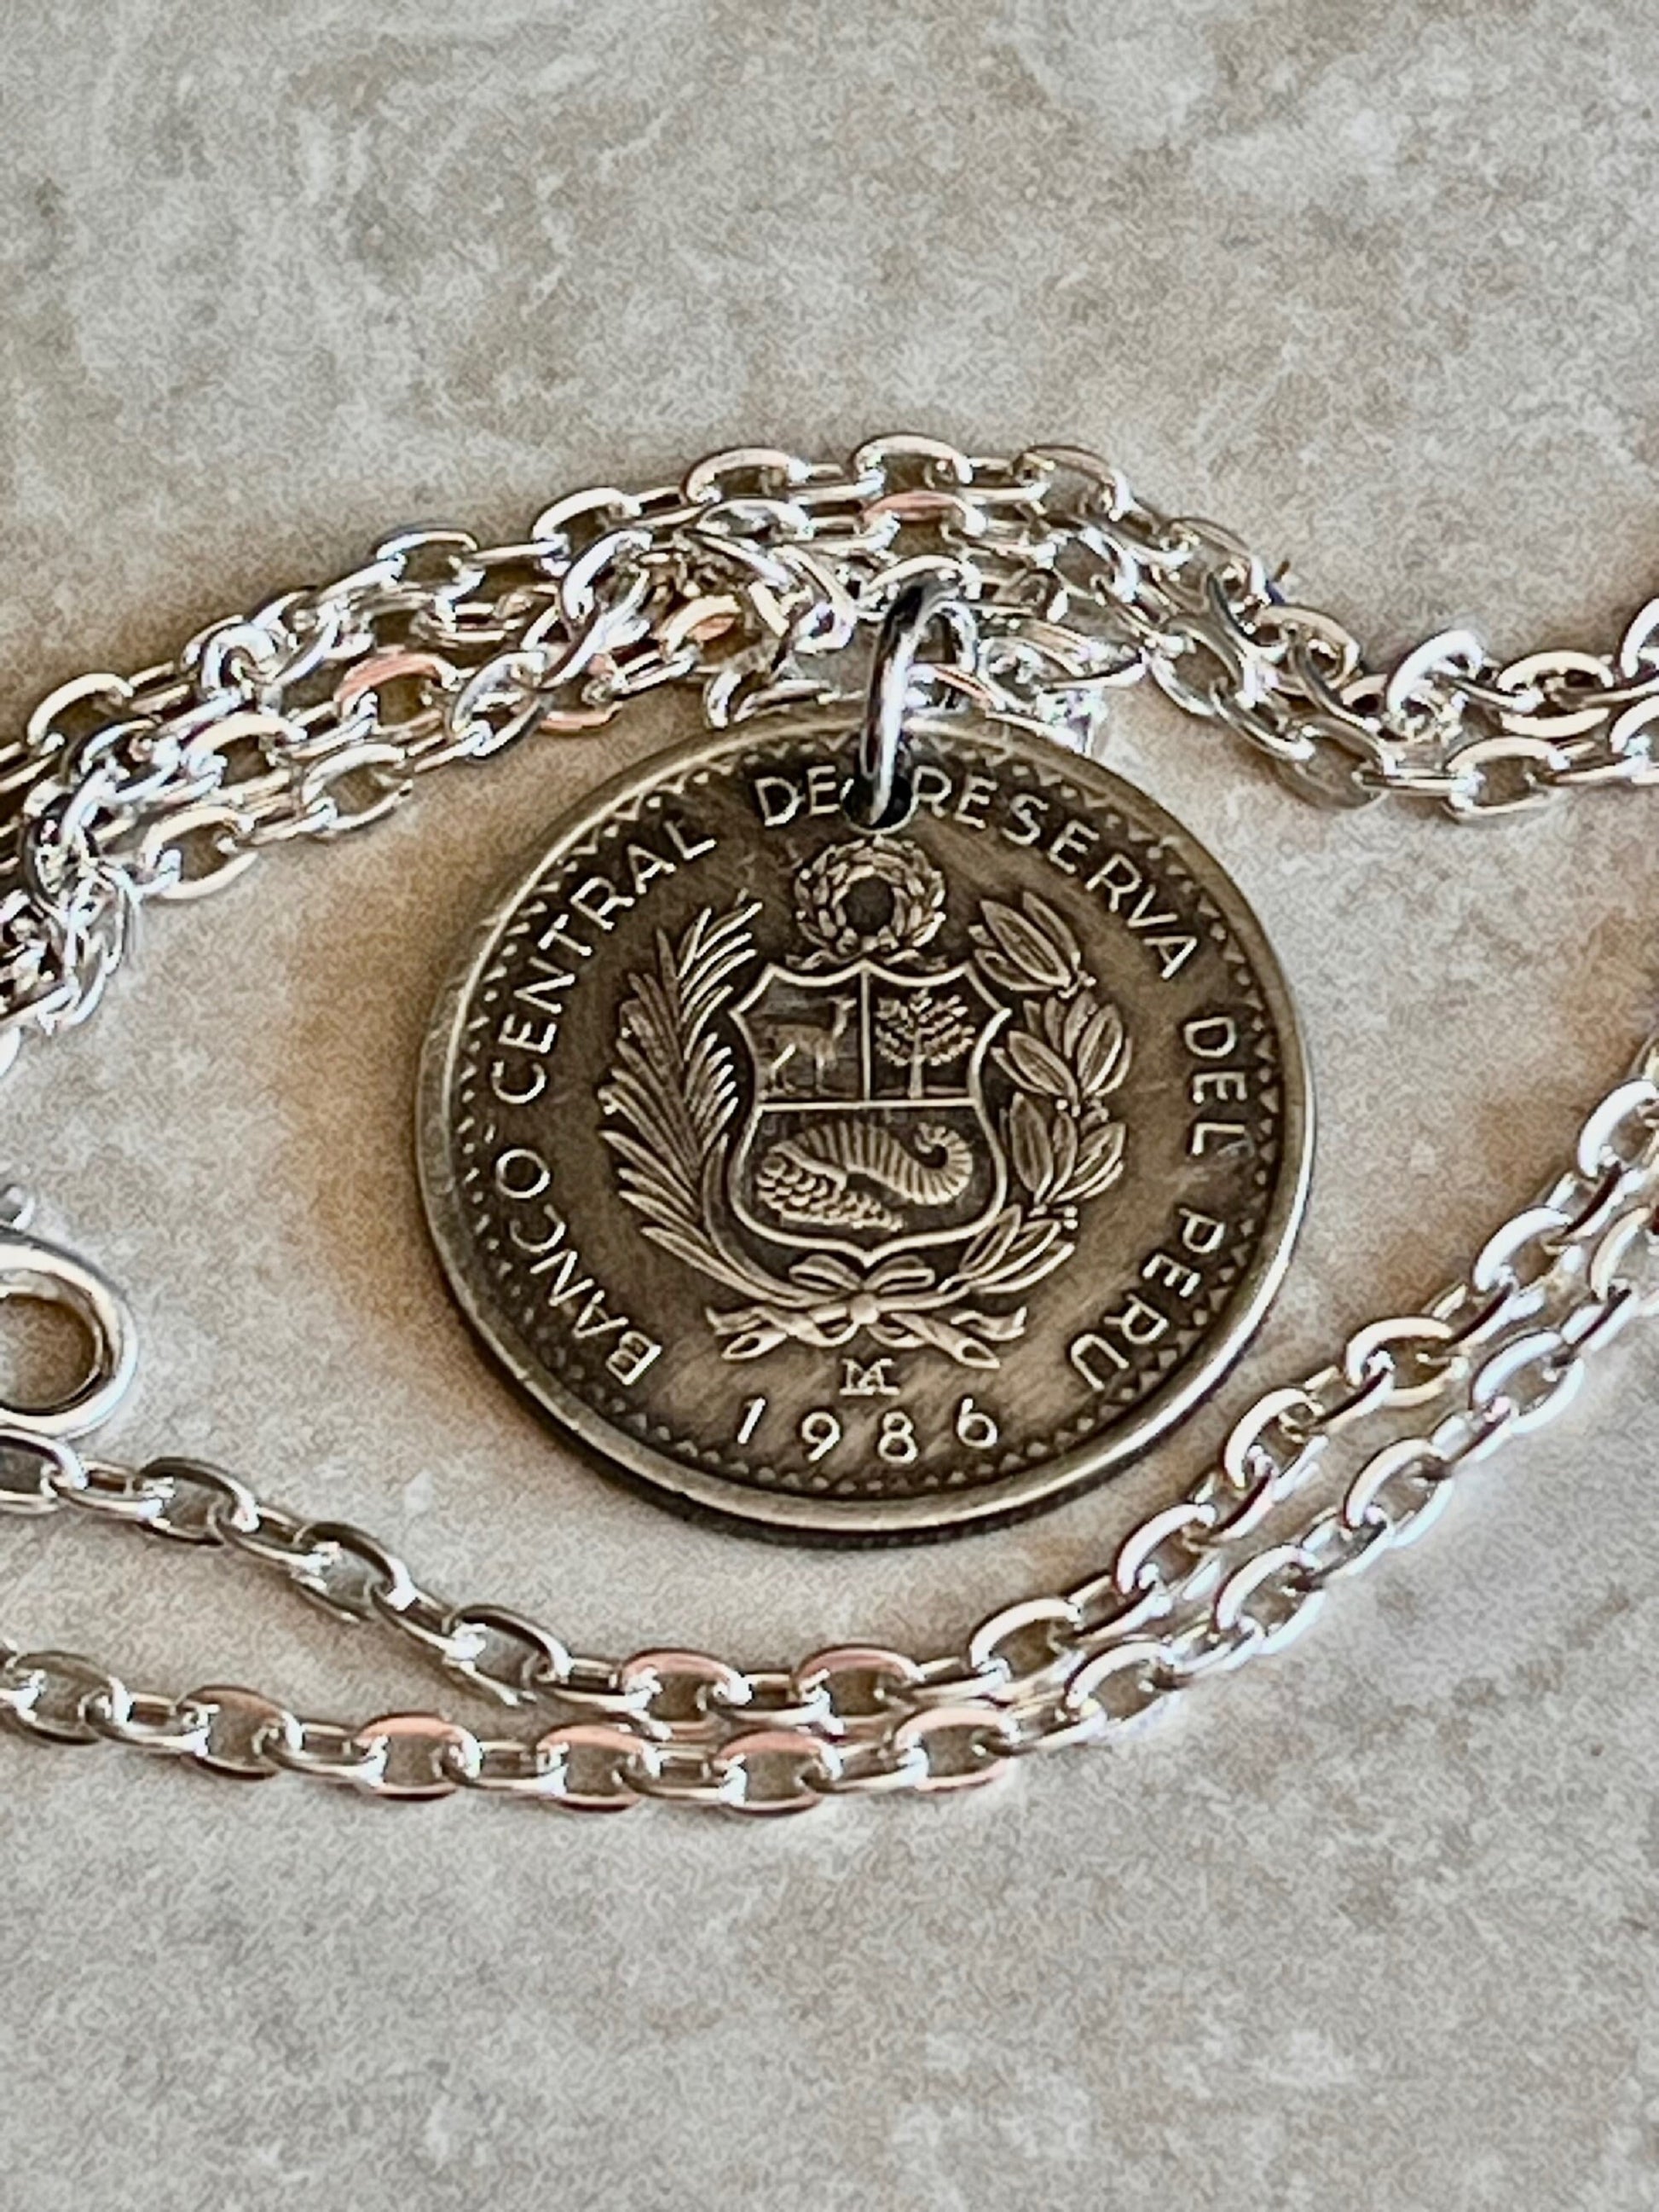 Peru Coin Pendant Peruvian 5 Cinco Intis Personal Necklace Old Vintage Handmade Jewelry Gift Friend Charm For Him Her World Coin Collector